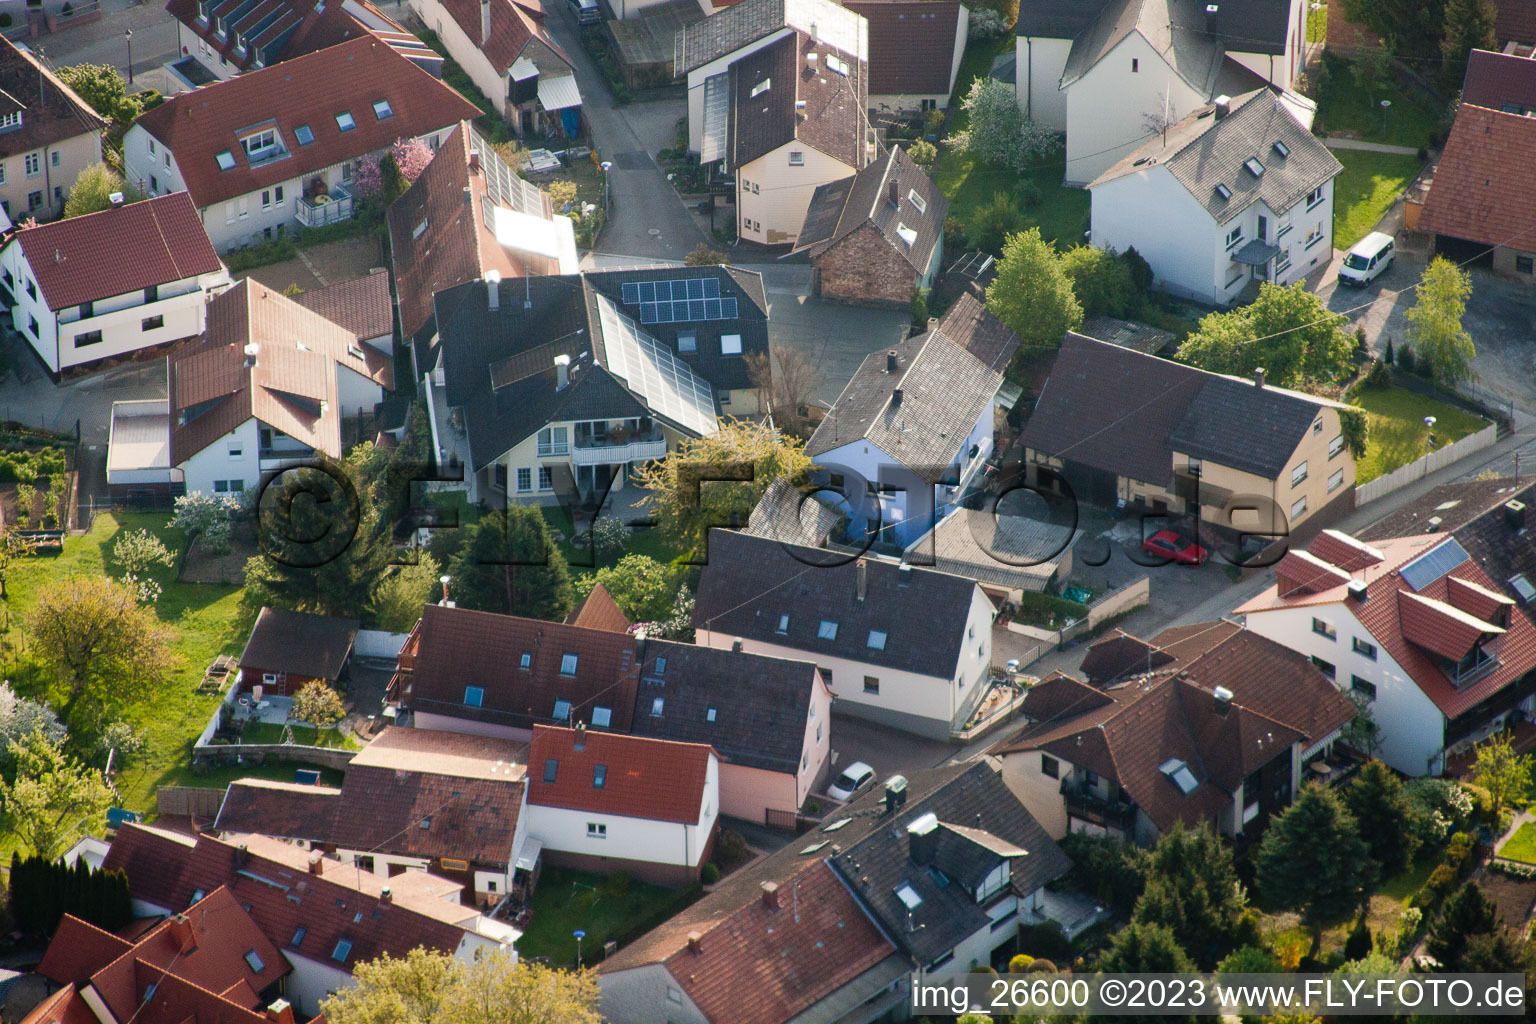 Drone recording of District Stupferich in Karlsruhe in the state Baden-Wuerttemberg, Germany